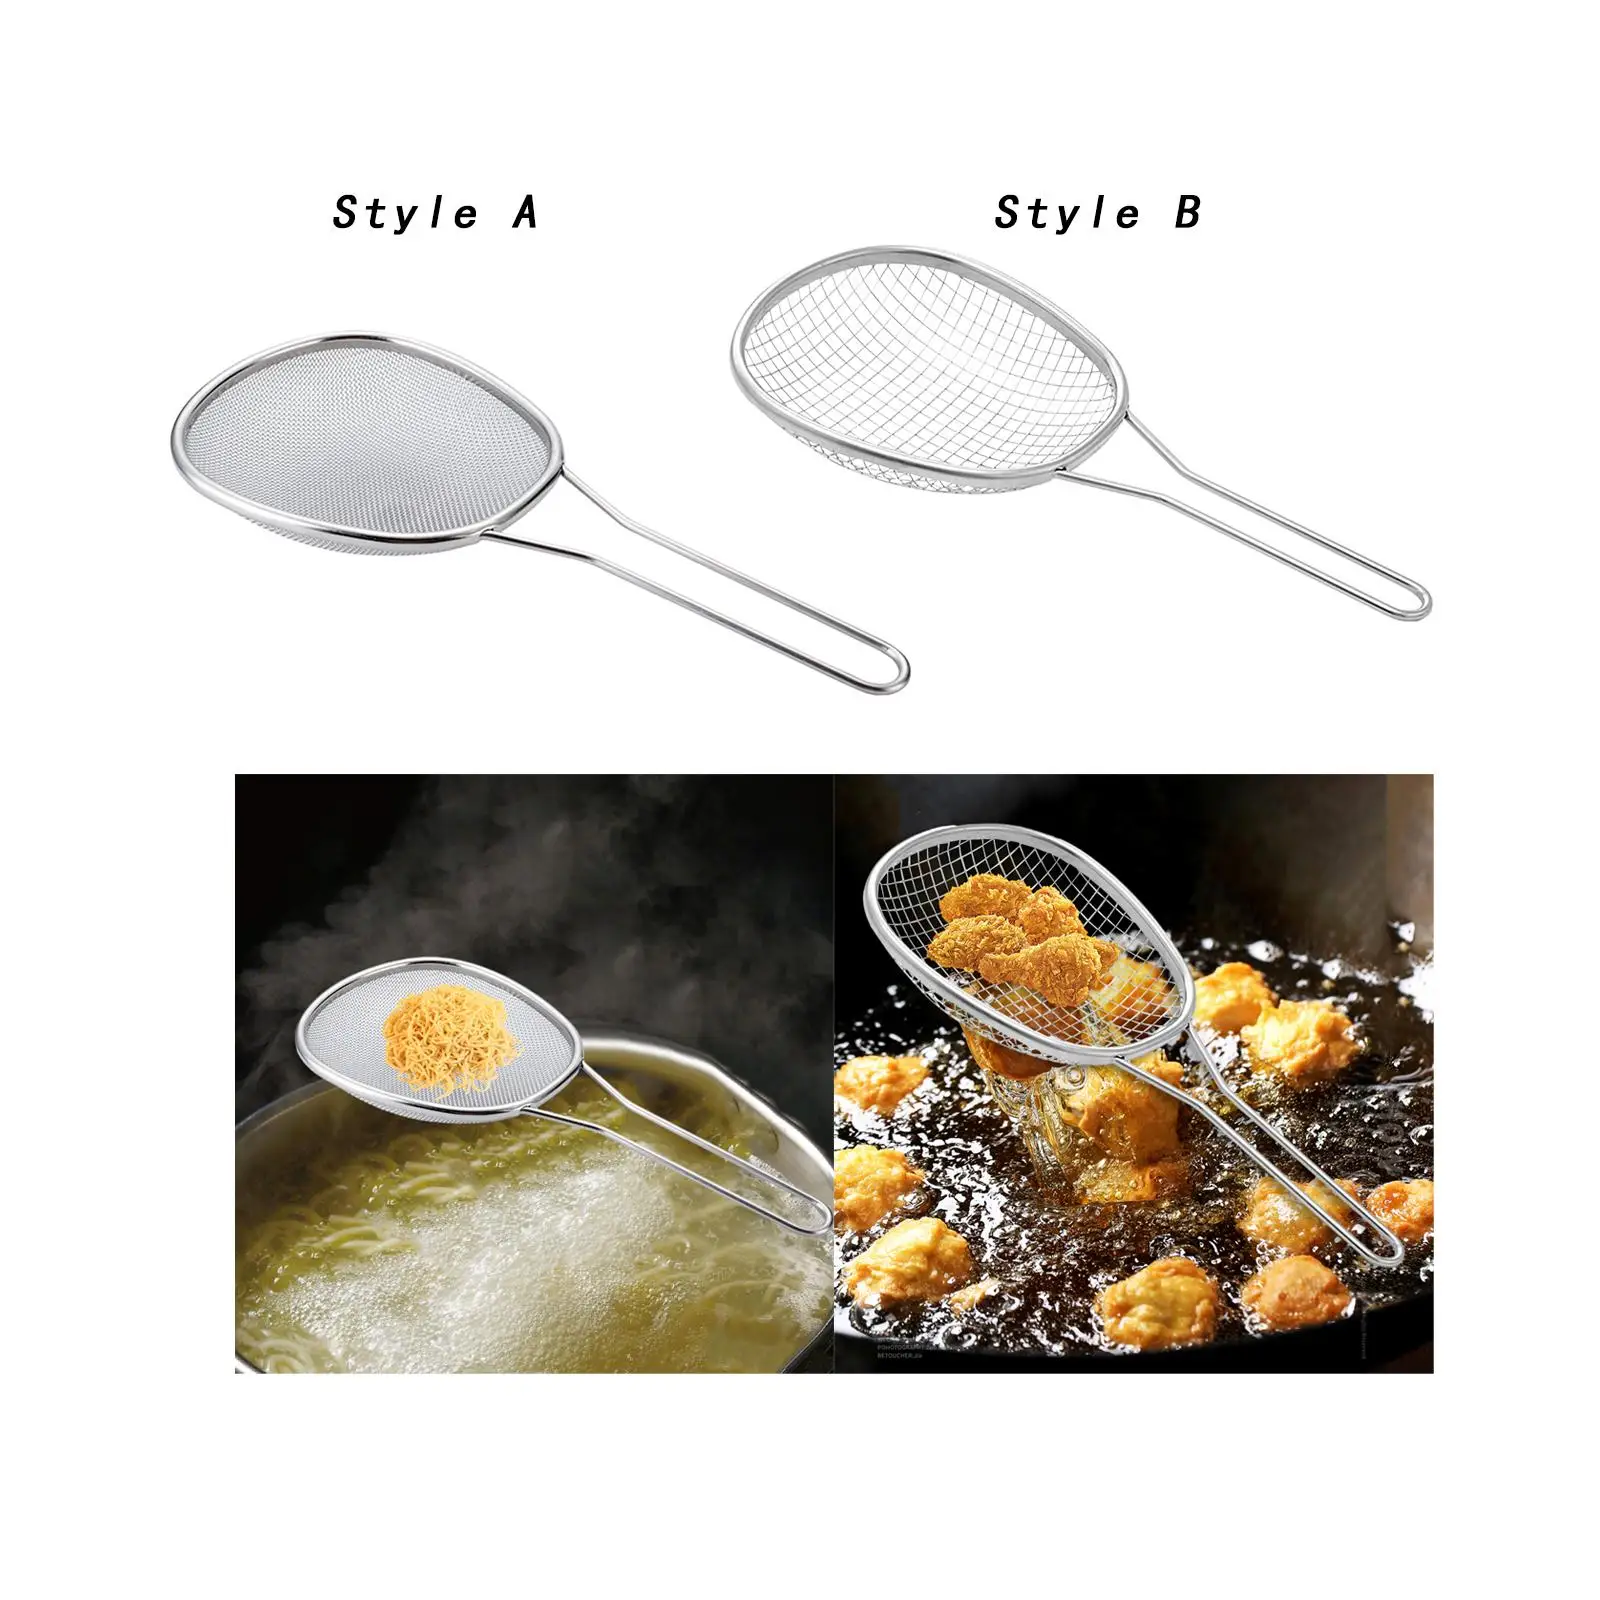 Stainless Steel Mesh Strainer with Non Slip Handles Tea Coffee Juice Strainer Food Strainer for Tea Food Oil Sifting Flour Juice